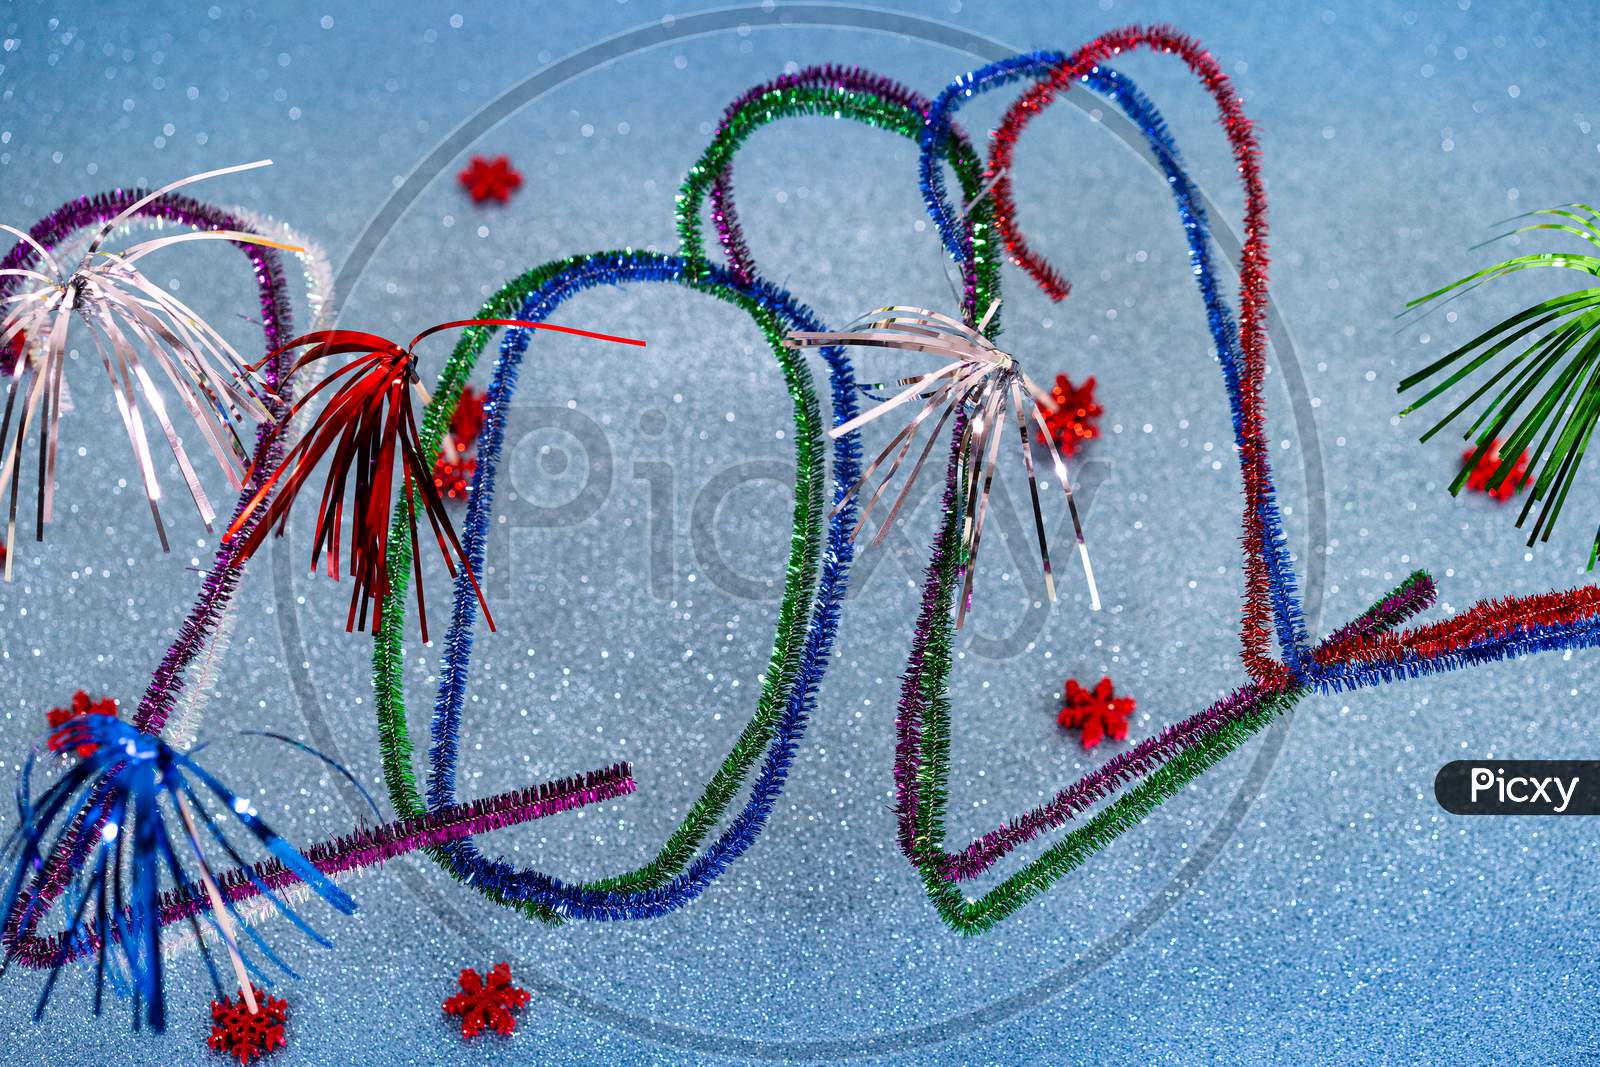 2022 New Years Postcard With Festive Multicolored Pipe Cleaners.